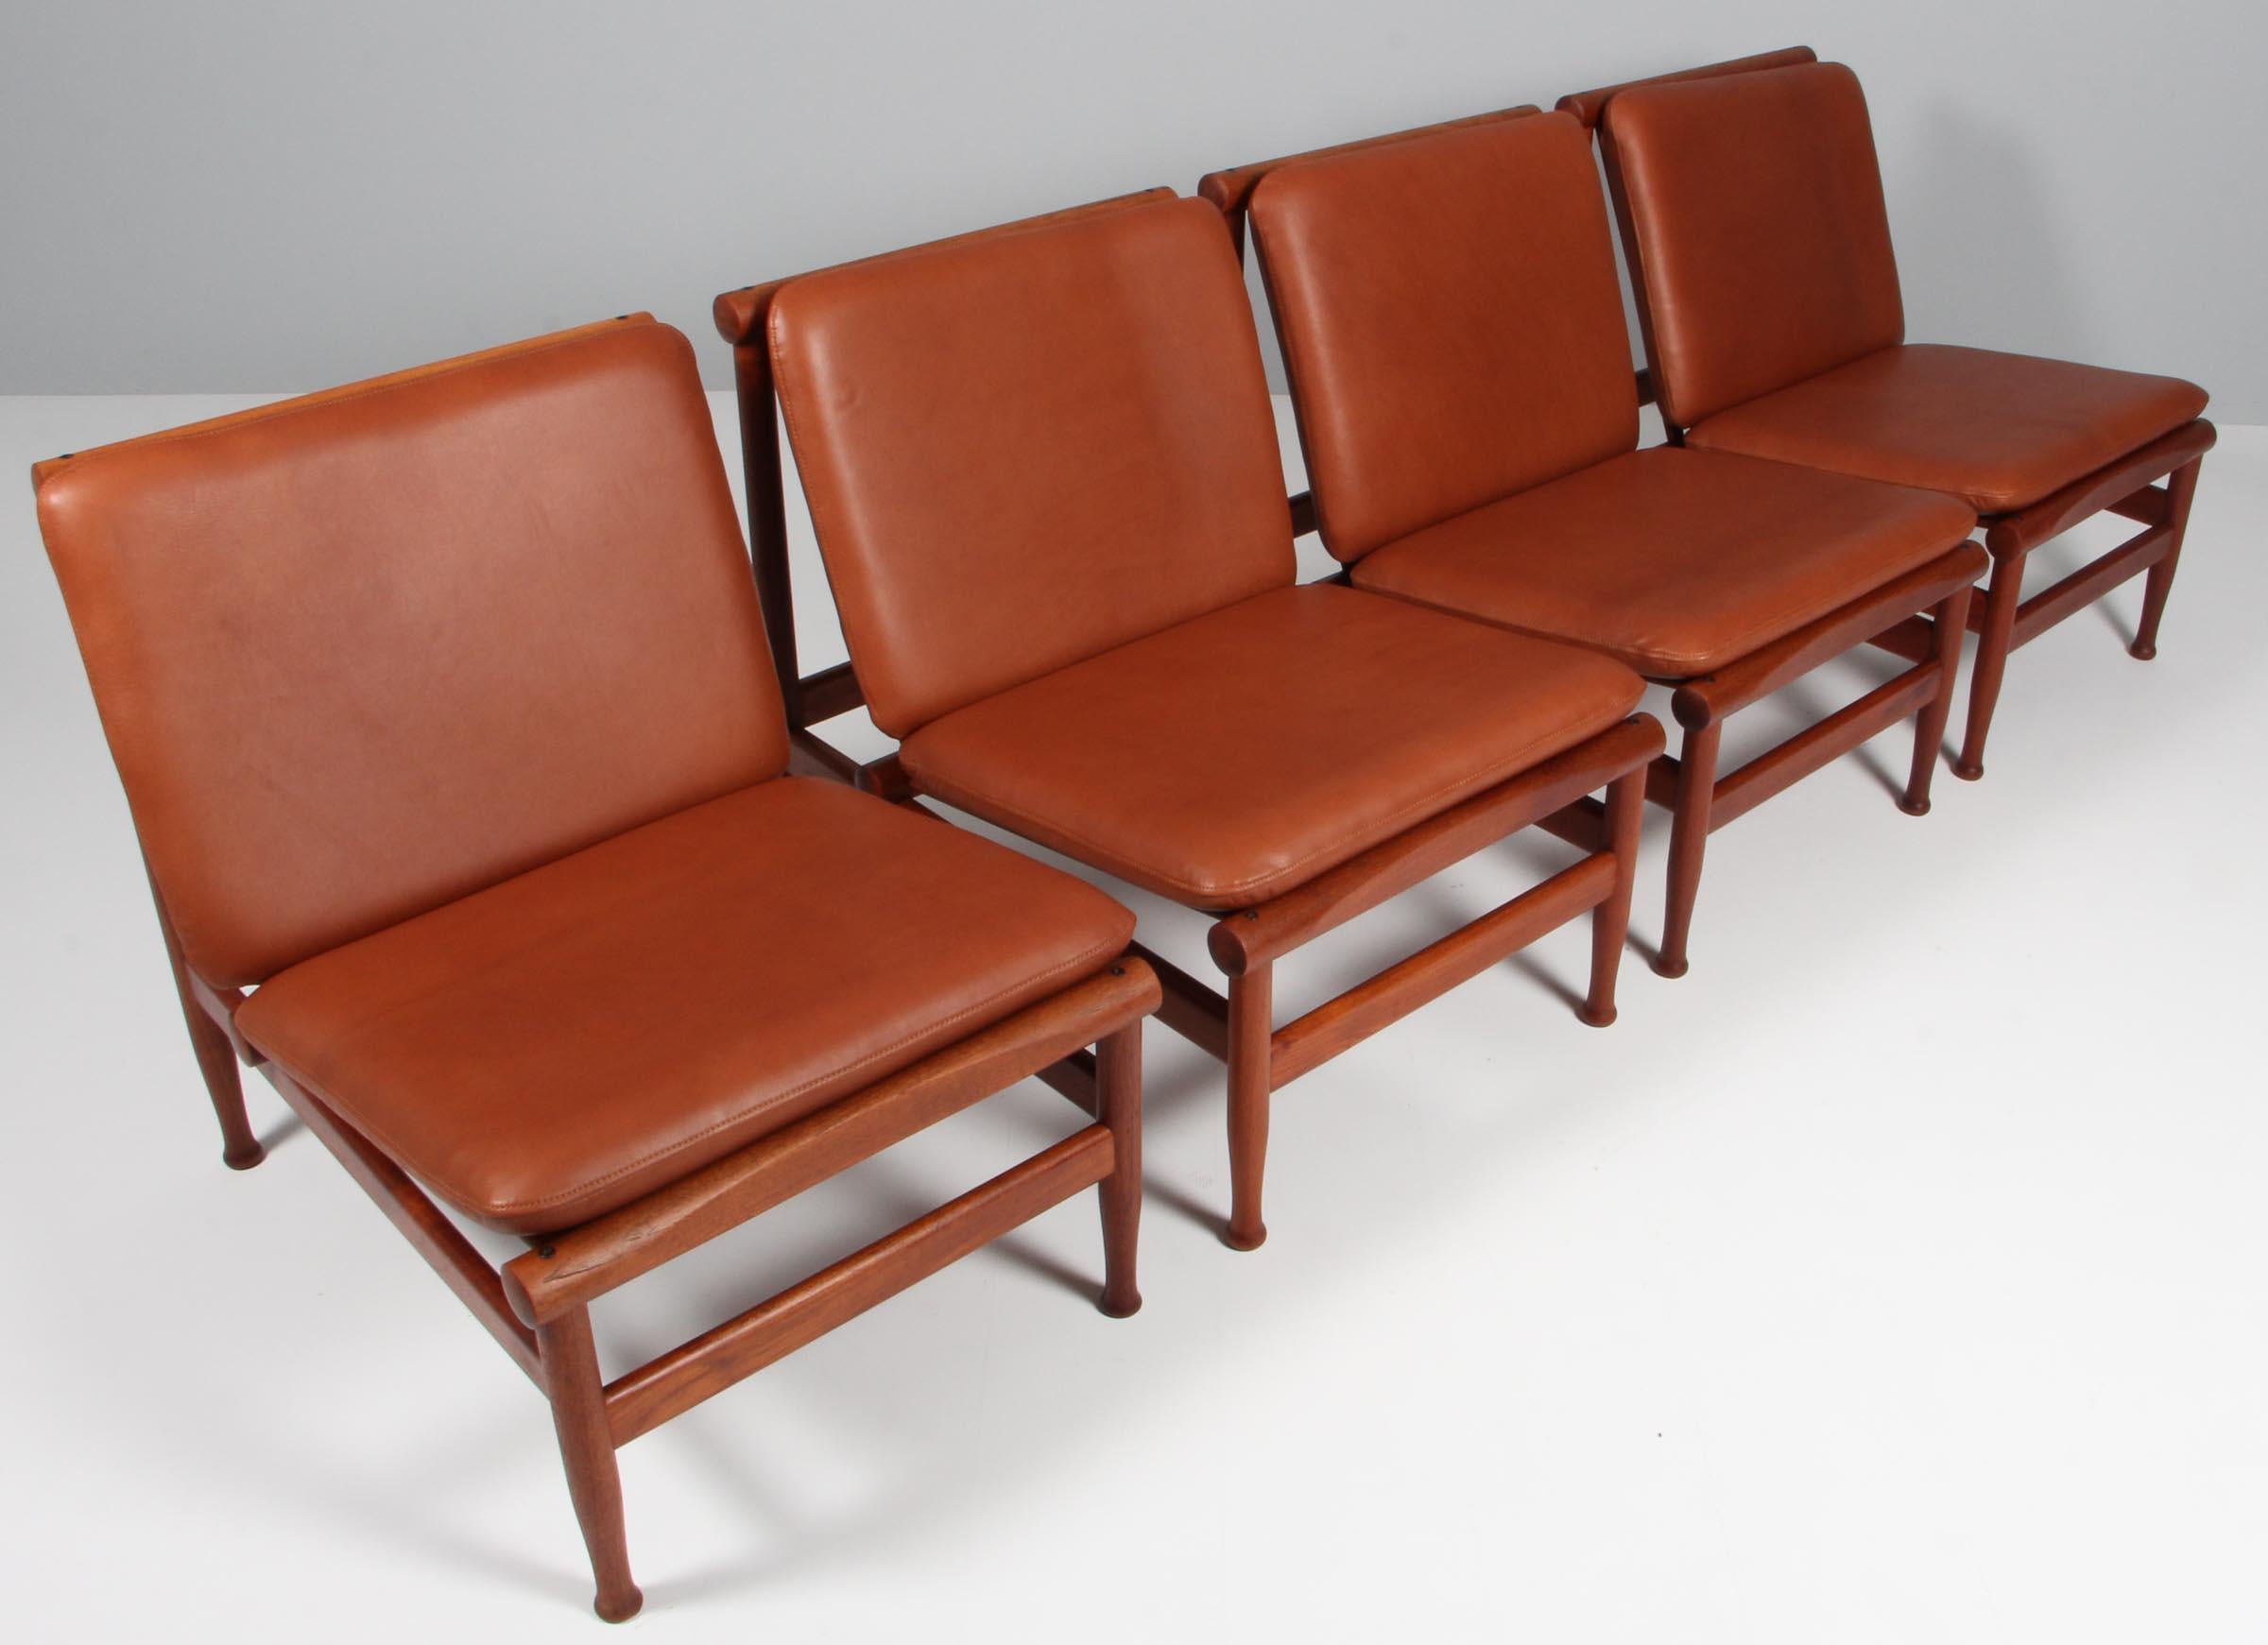 Kai Lyngfeldt Larsen lounge chairs in solid teak.

New upholstered with brandy coloured aniline leather.

Model 501, made by Søborg Møbler.

